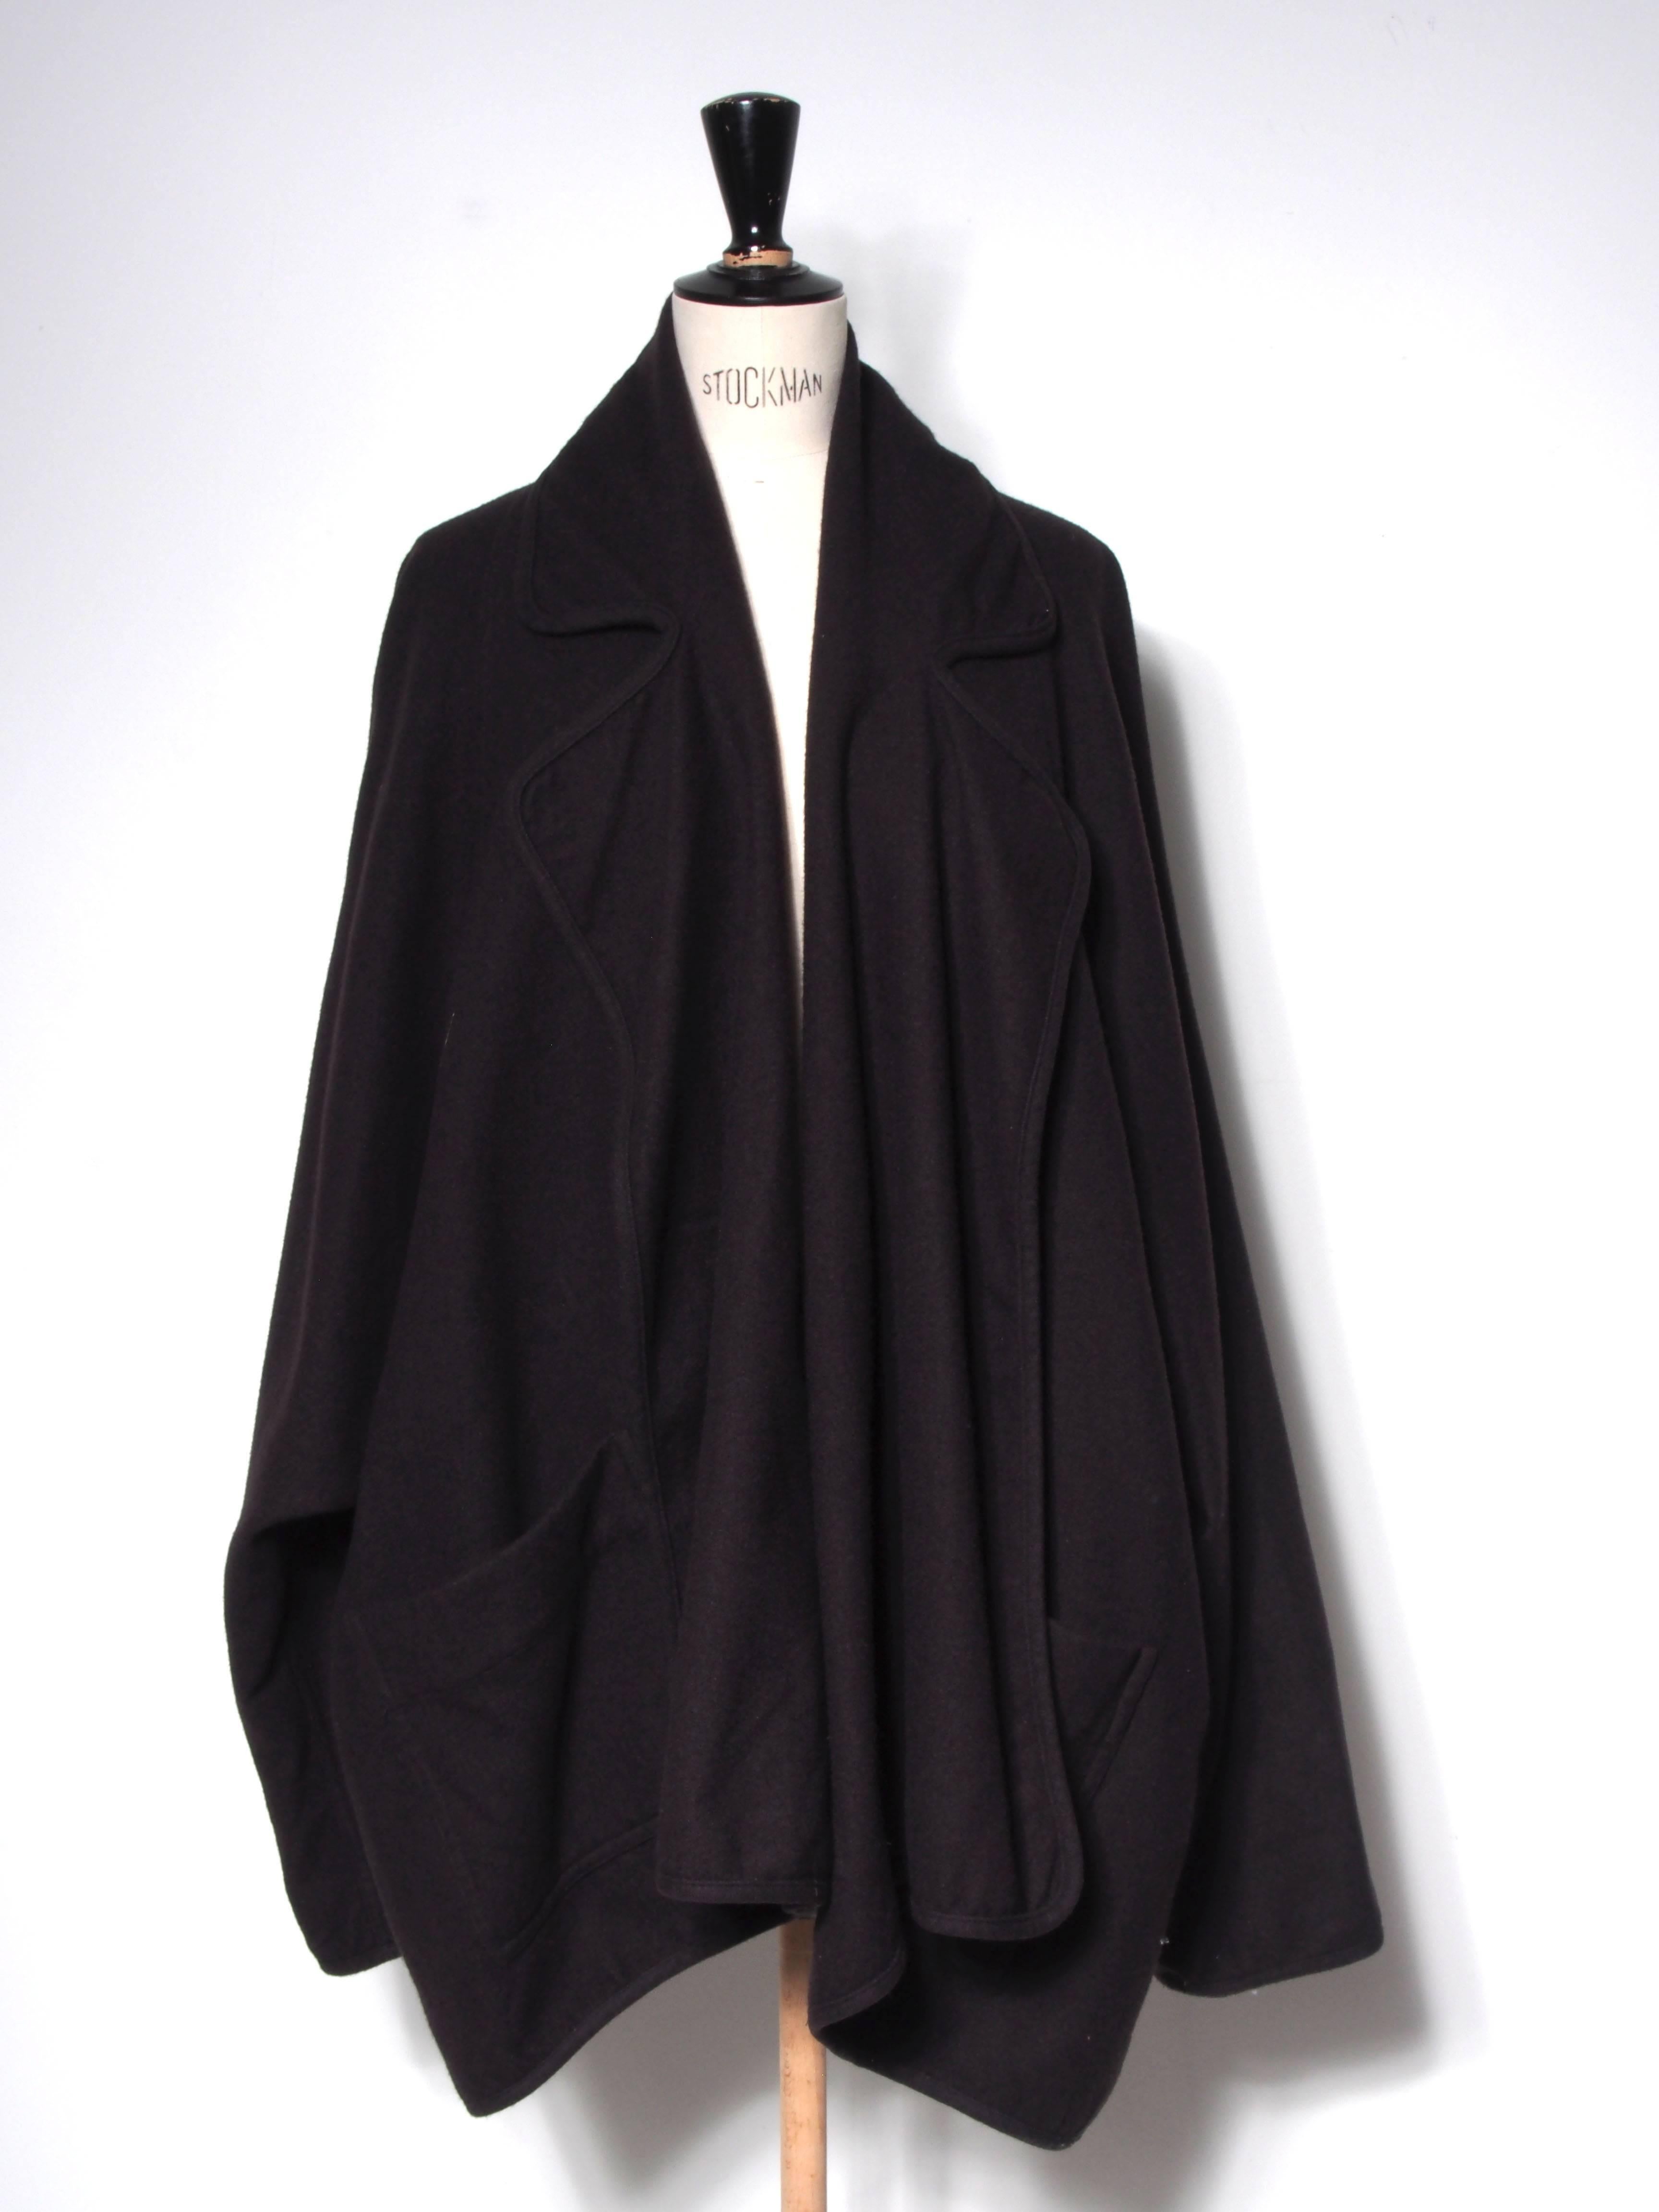 Draped brown wool open front jacket with oversized collar and pockets.